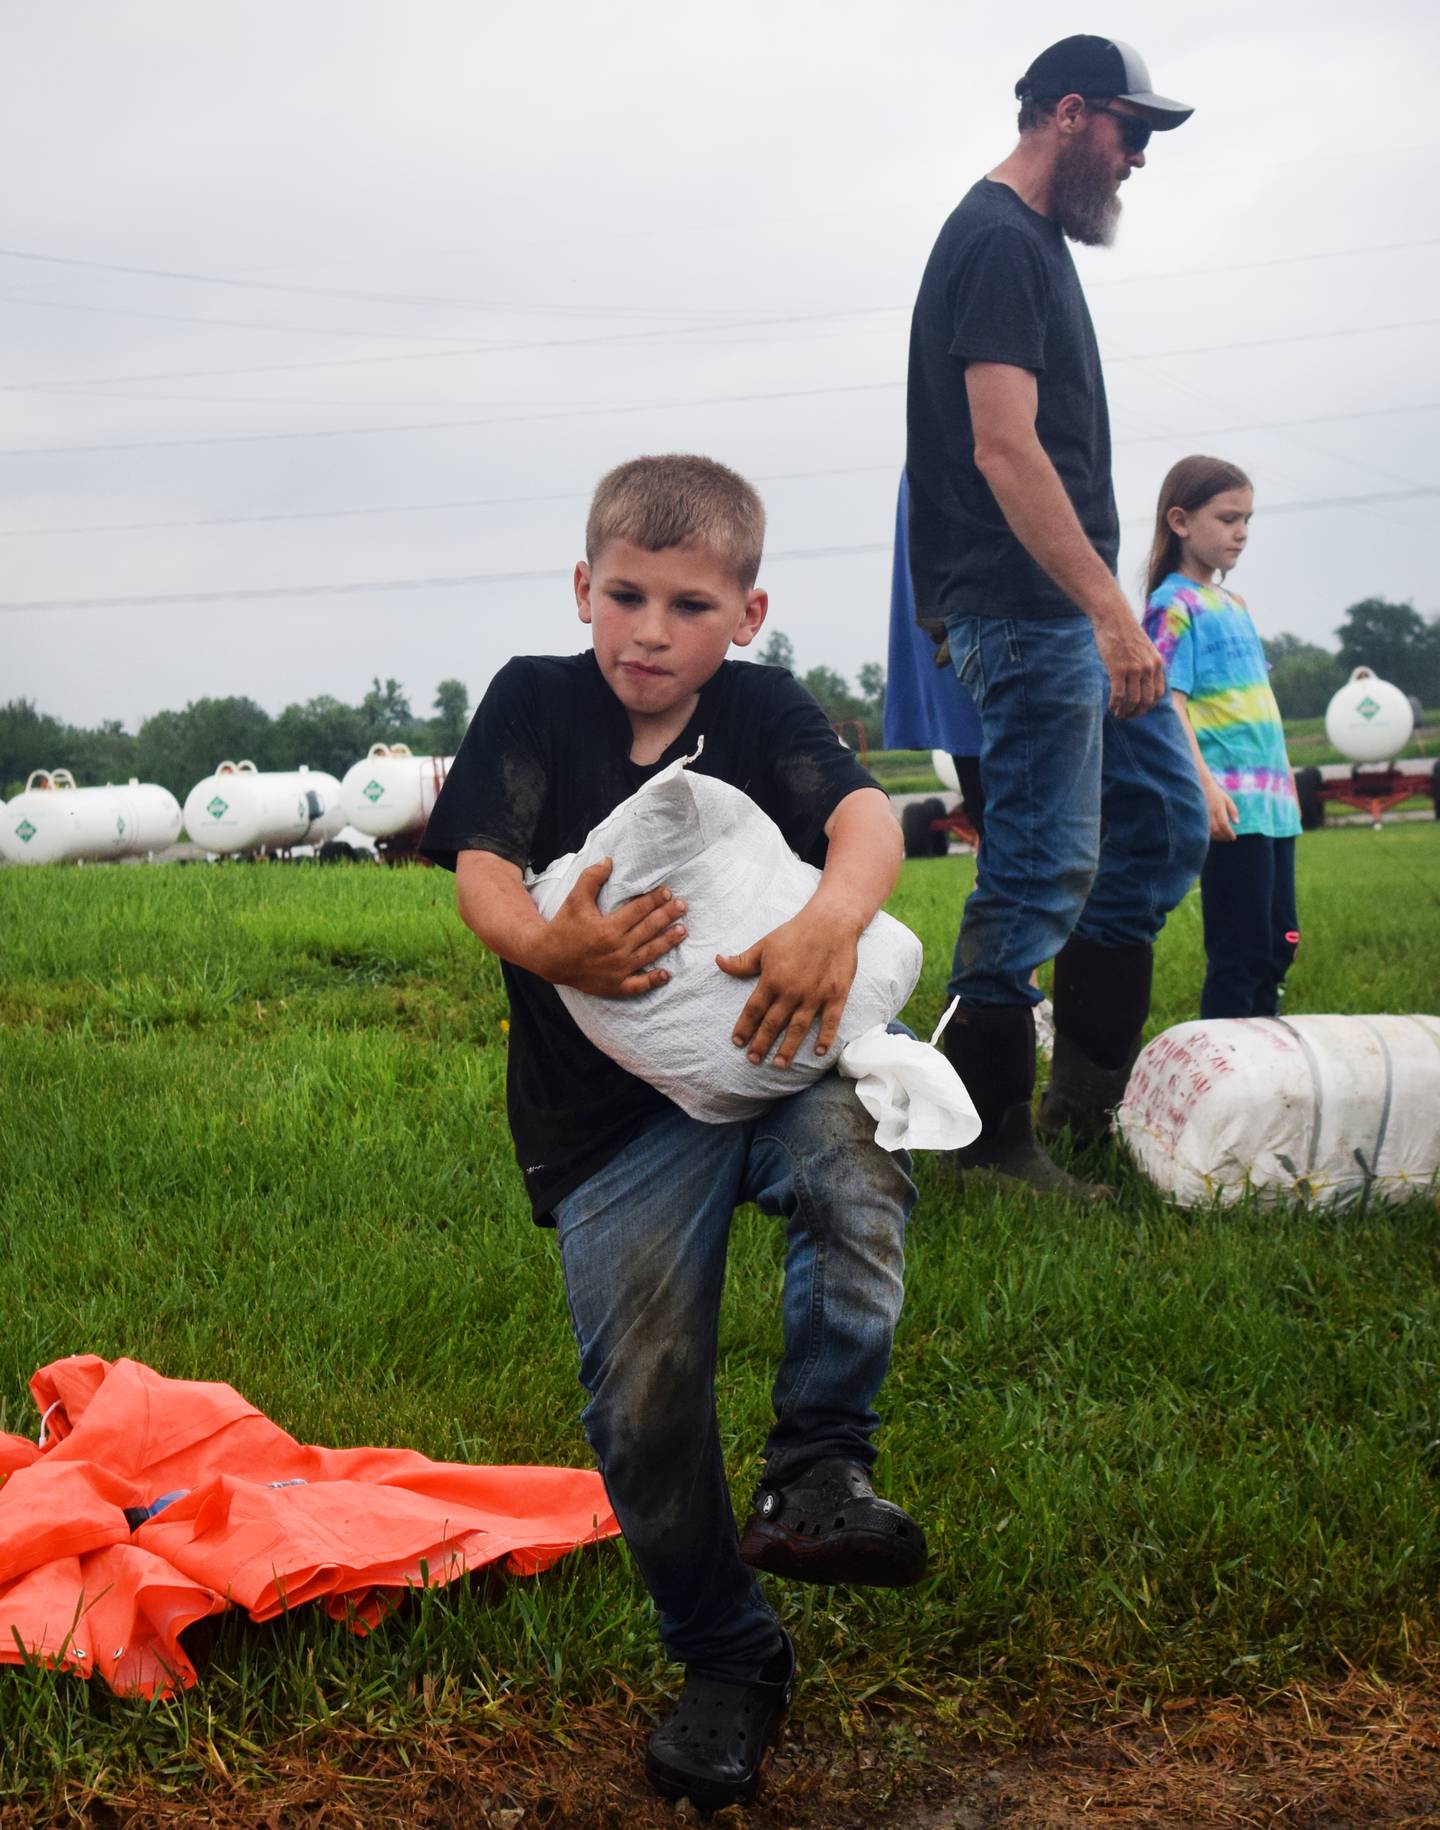 Trigg Dhondt, 7, of Kellogg on May 21 carries a sandbag alongside volunteers preparing for even more flooding in the community. Kellogg was hit hard by floods, with the waters reaching as far as the Country Store and overtaking Highway 224 and a housing development after a culvert got clogged.